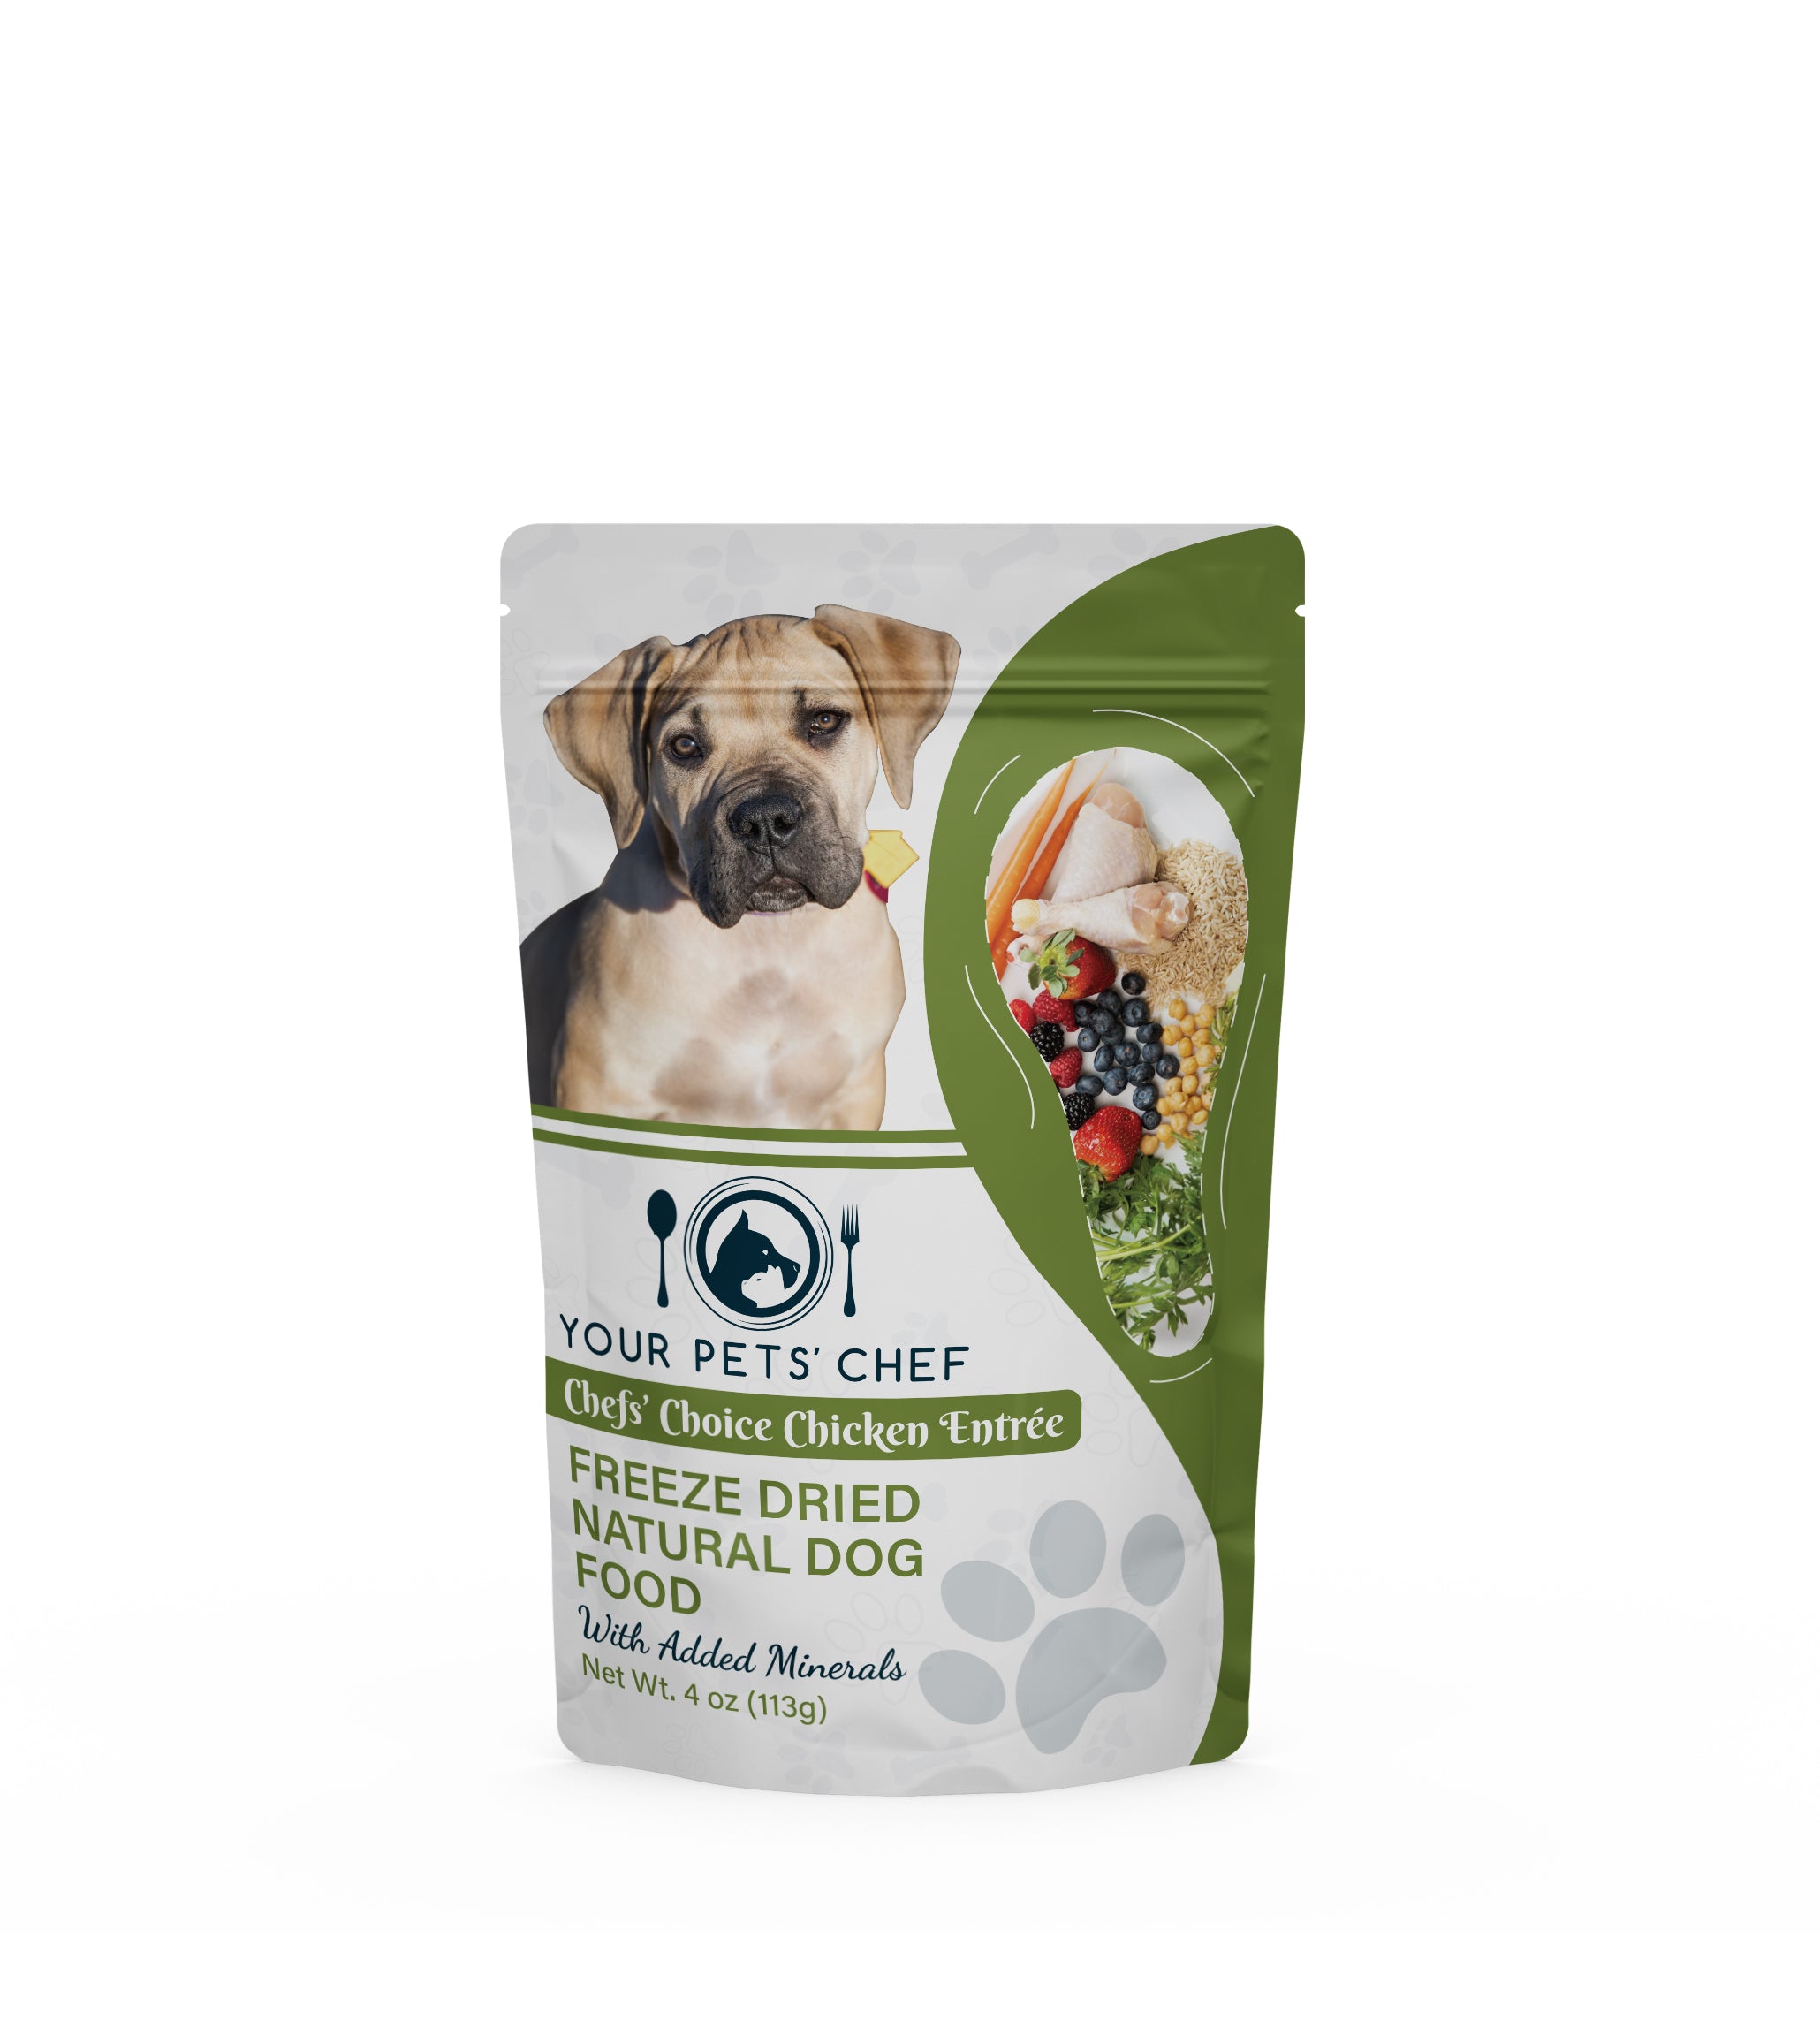 Freeze-Dried Chefs' Choice Chicken Entrée - Your Pets' Chef